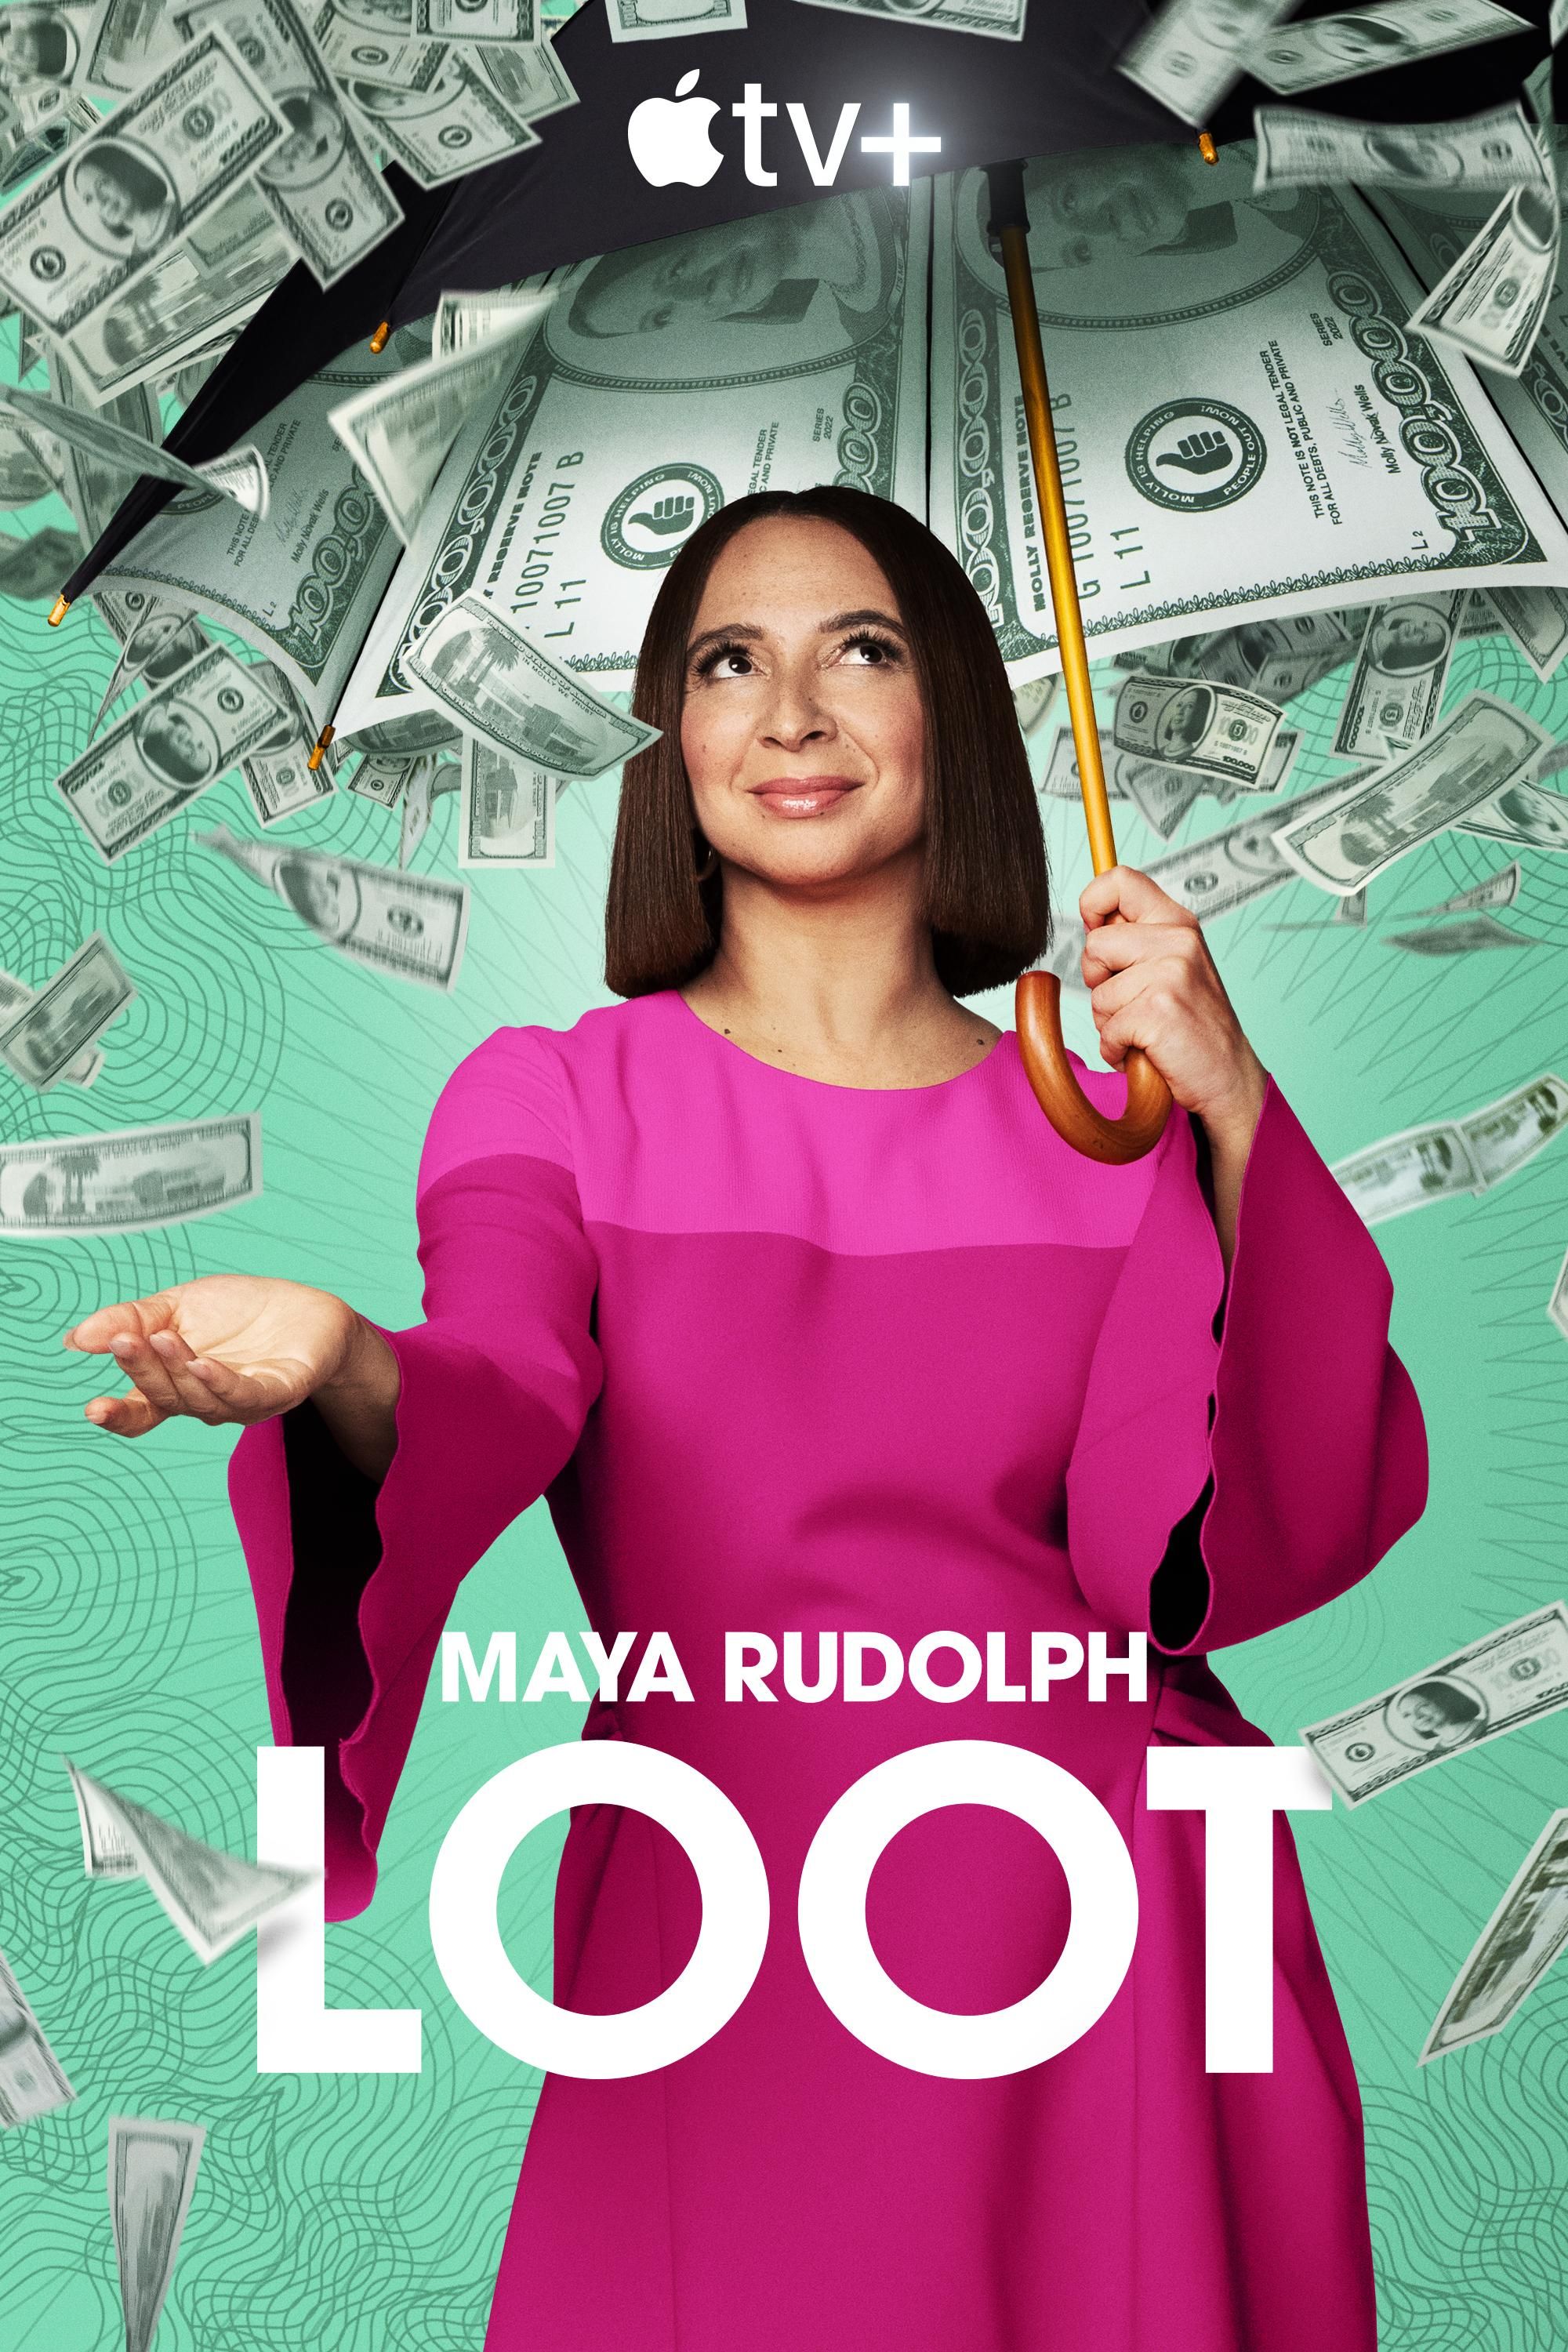 Maya Rudolph in the Loot poster